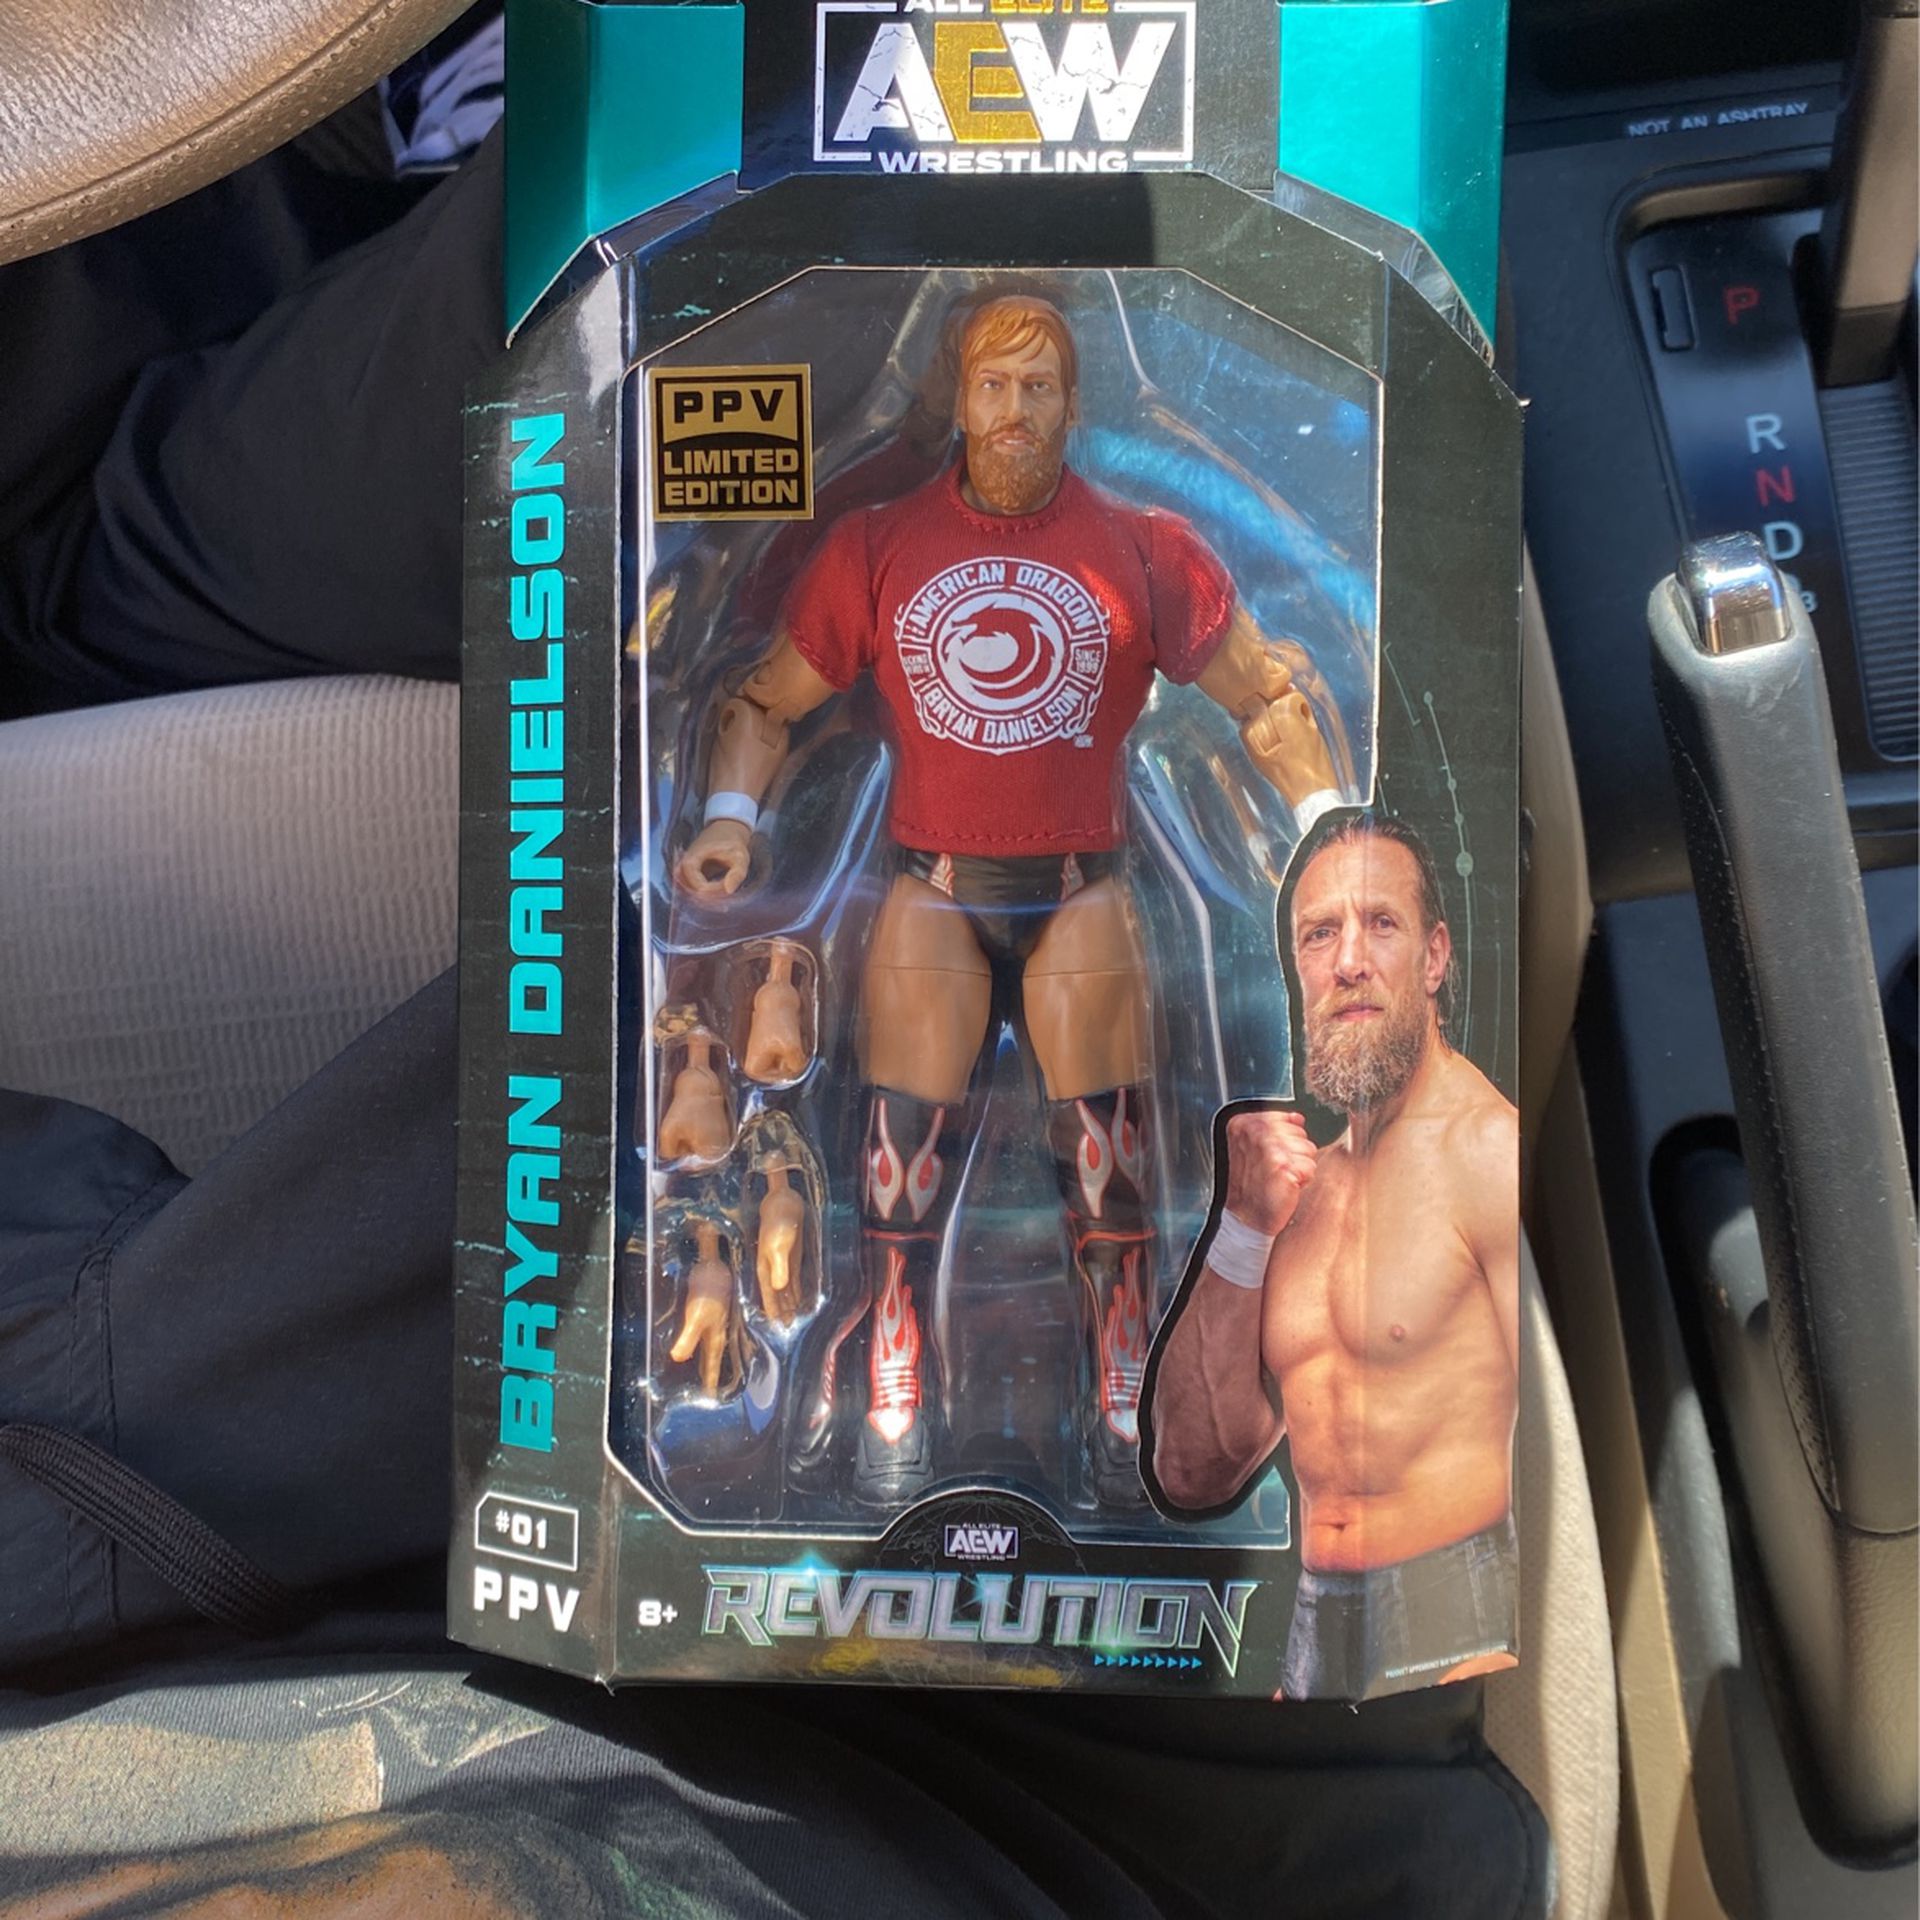 AEW Bryan Danielson  PPV Edition target Exclusive 